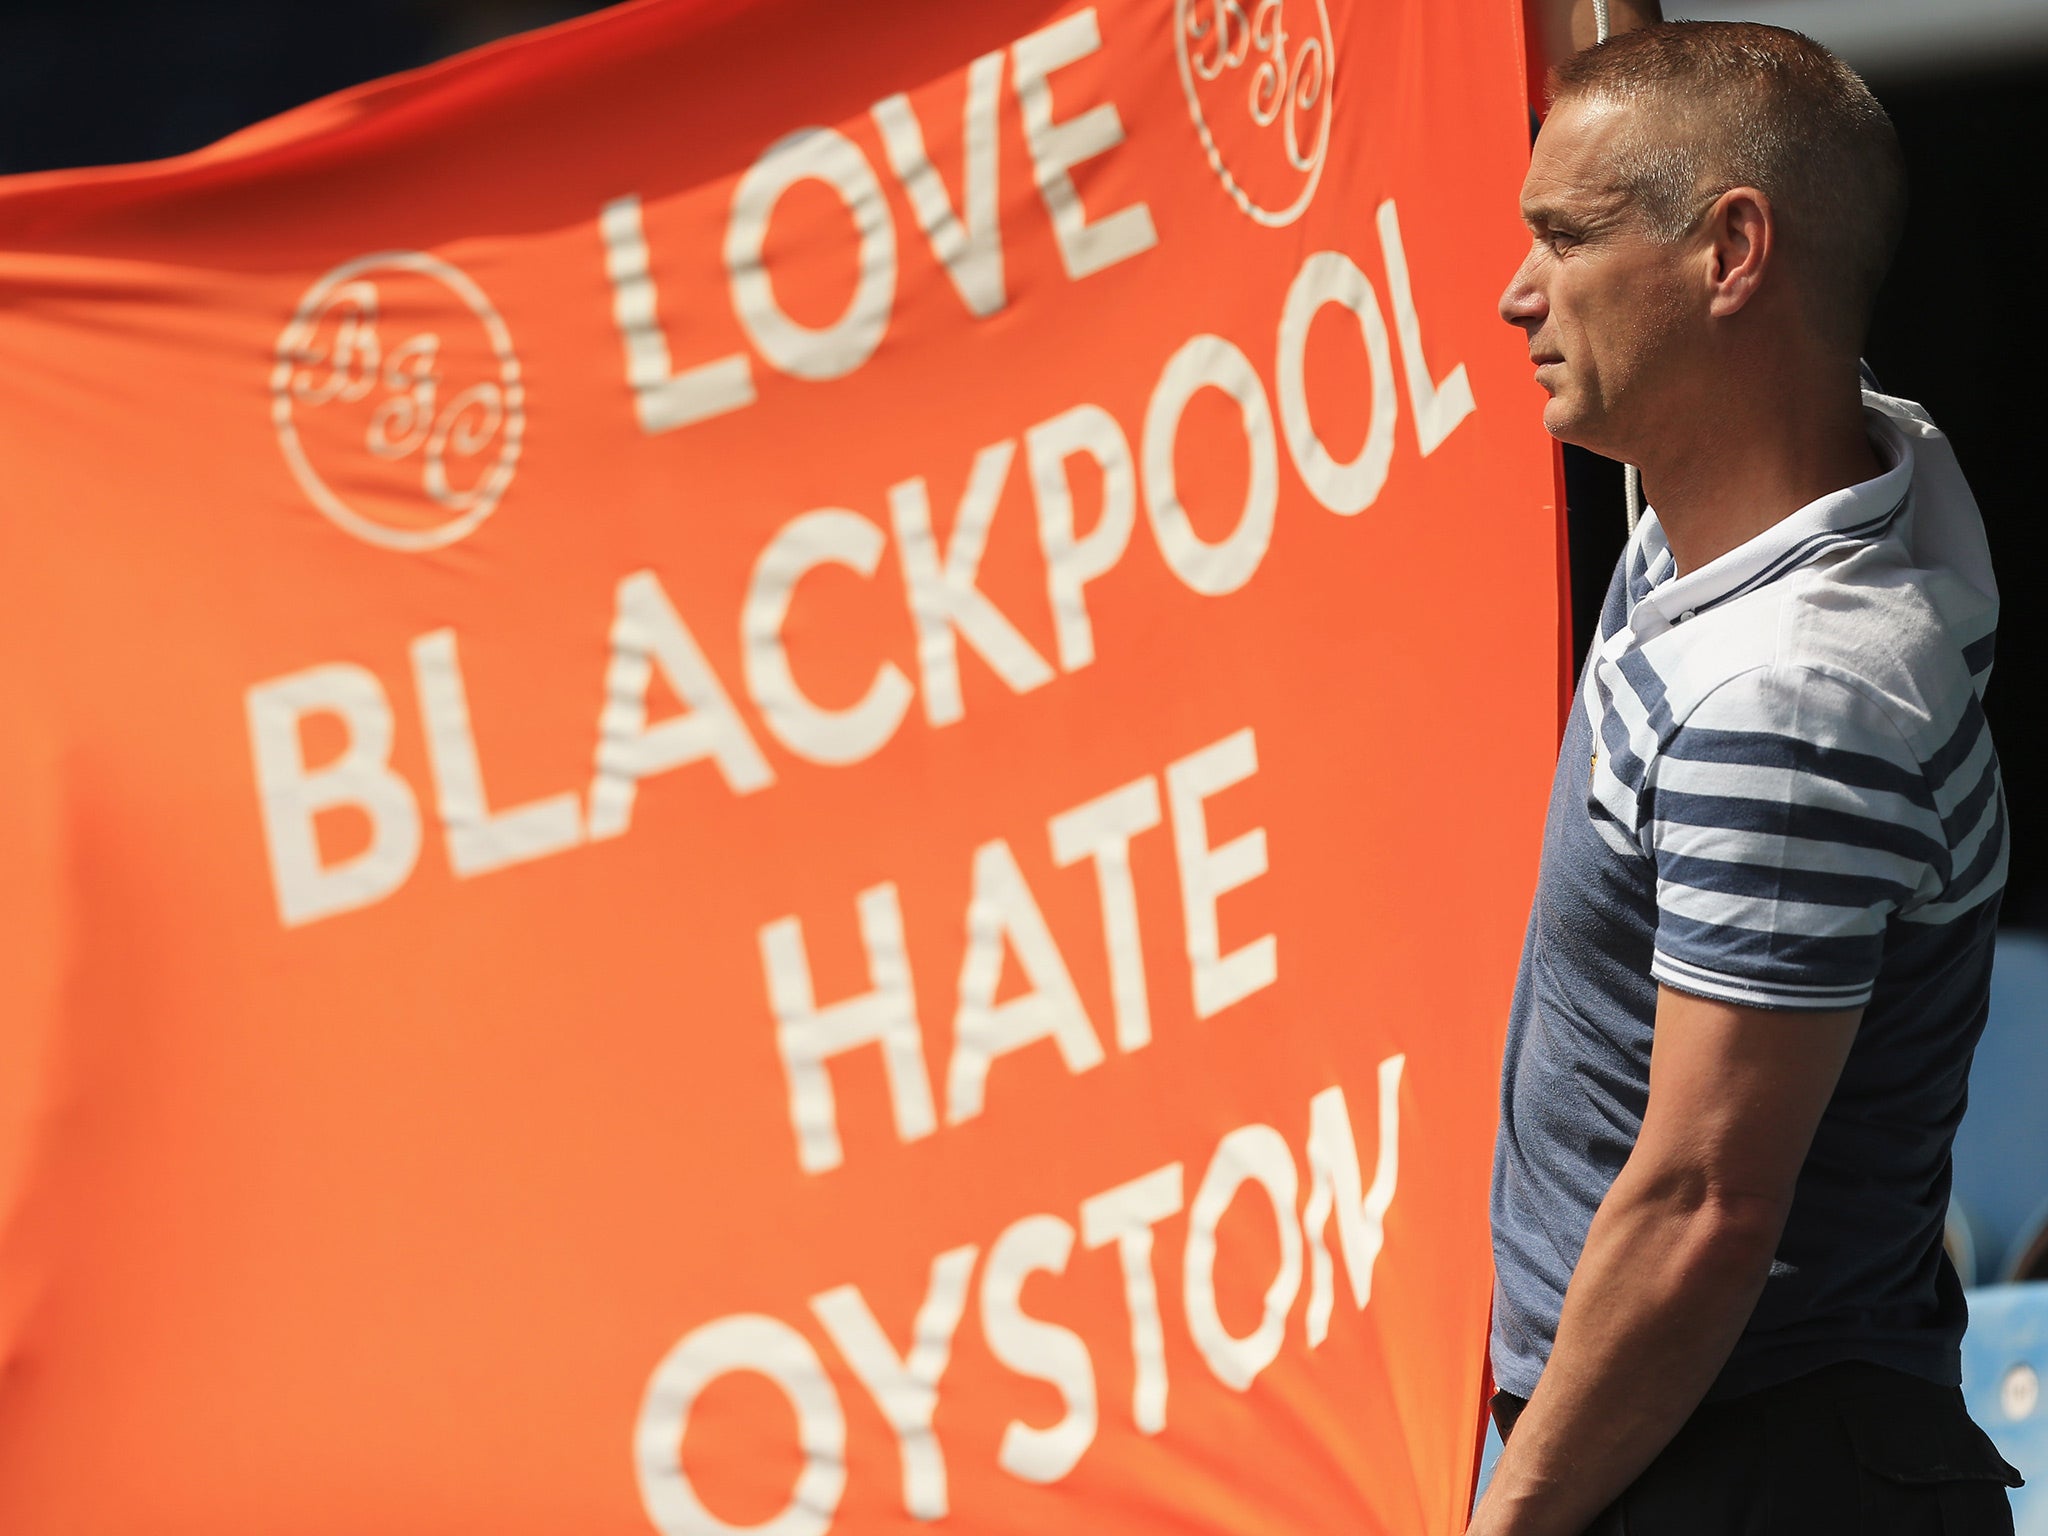 Blackpool fans have endured a long battle with the club's owners